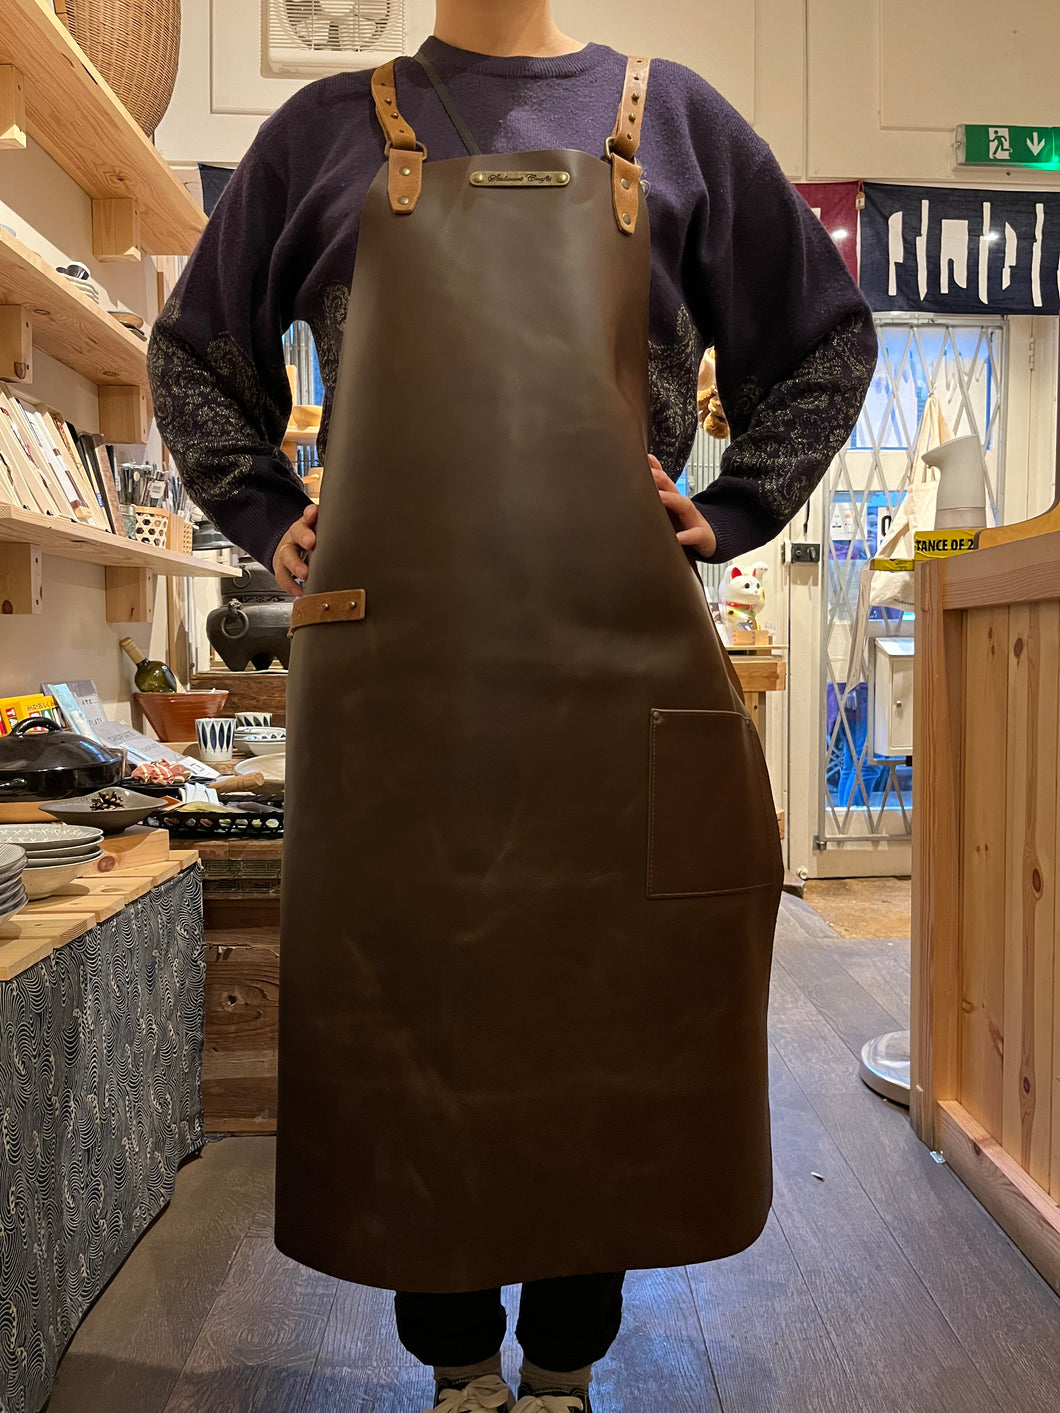 STALWART CRAFTS  CROSS STRAP LEATHER APRON BROWN*